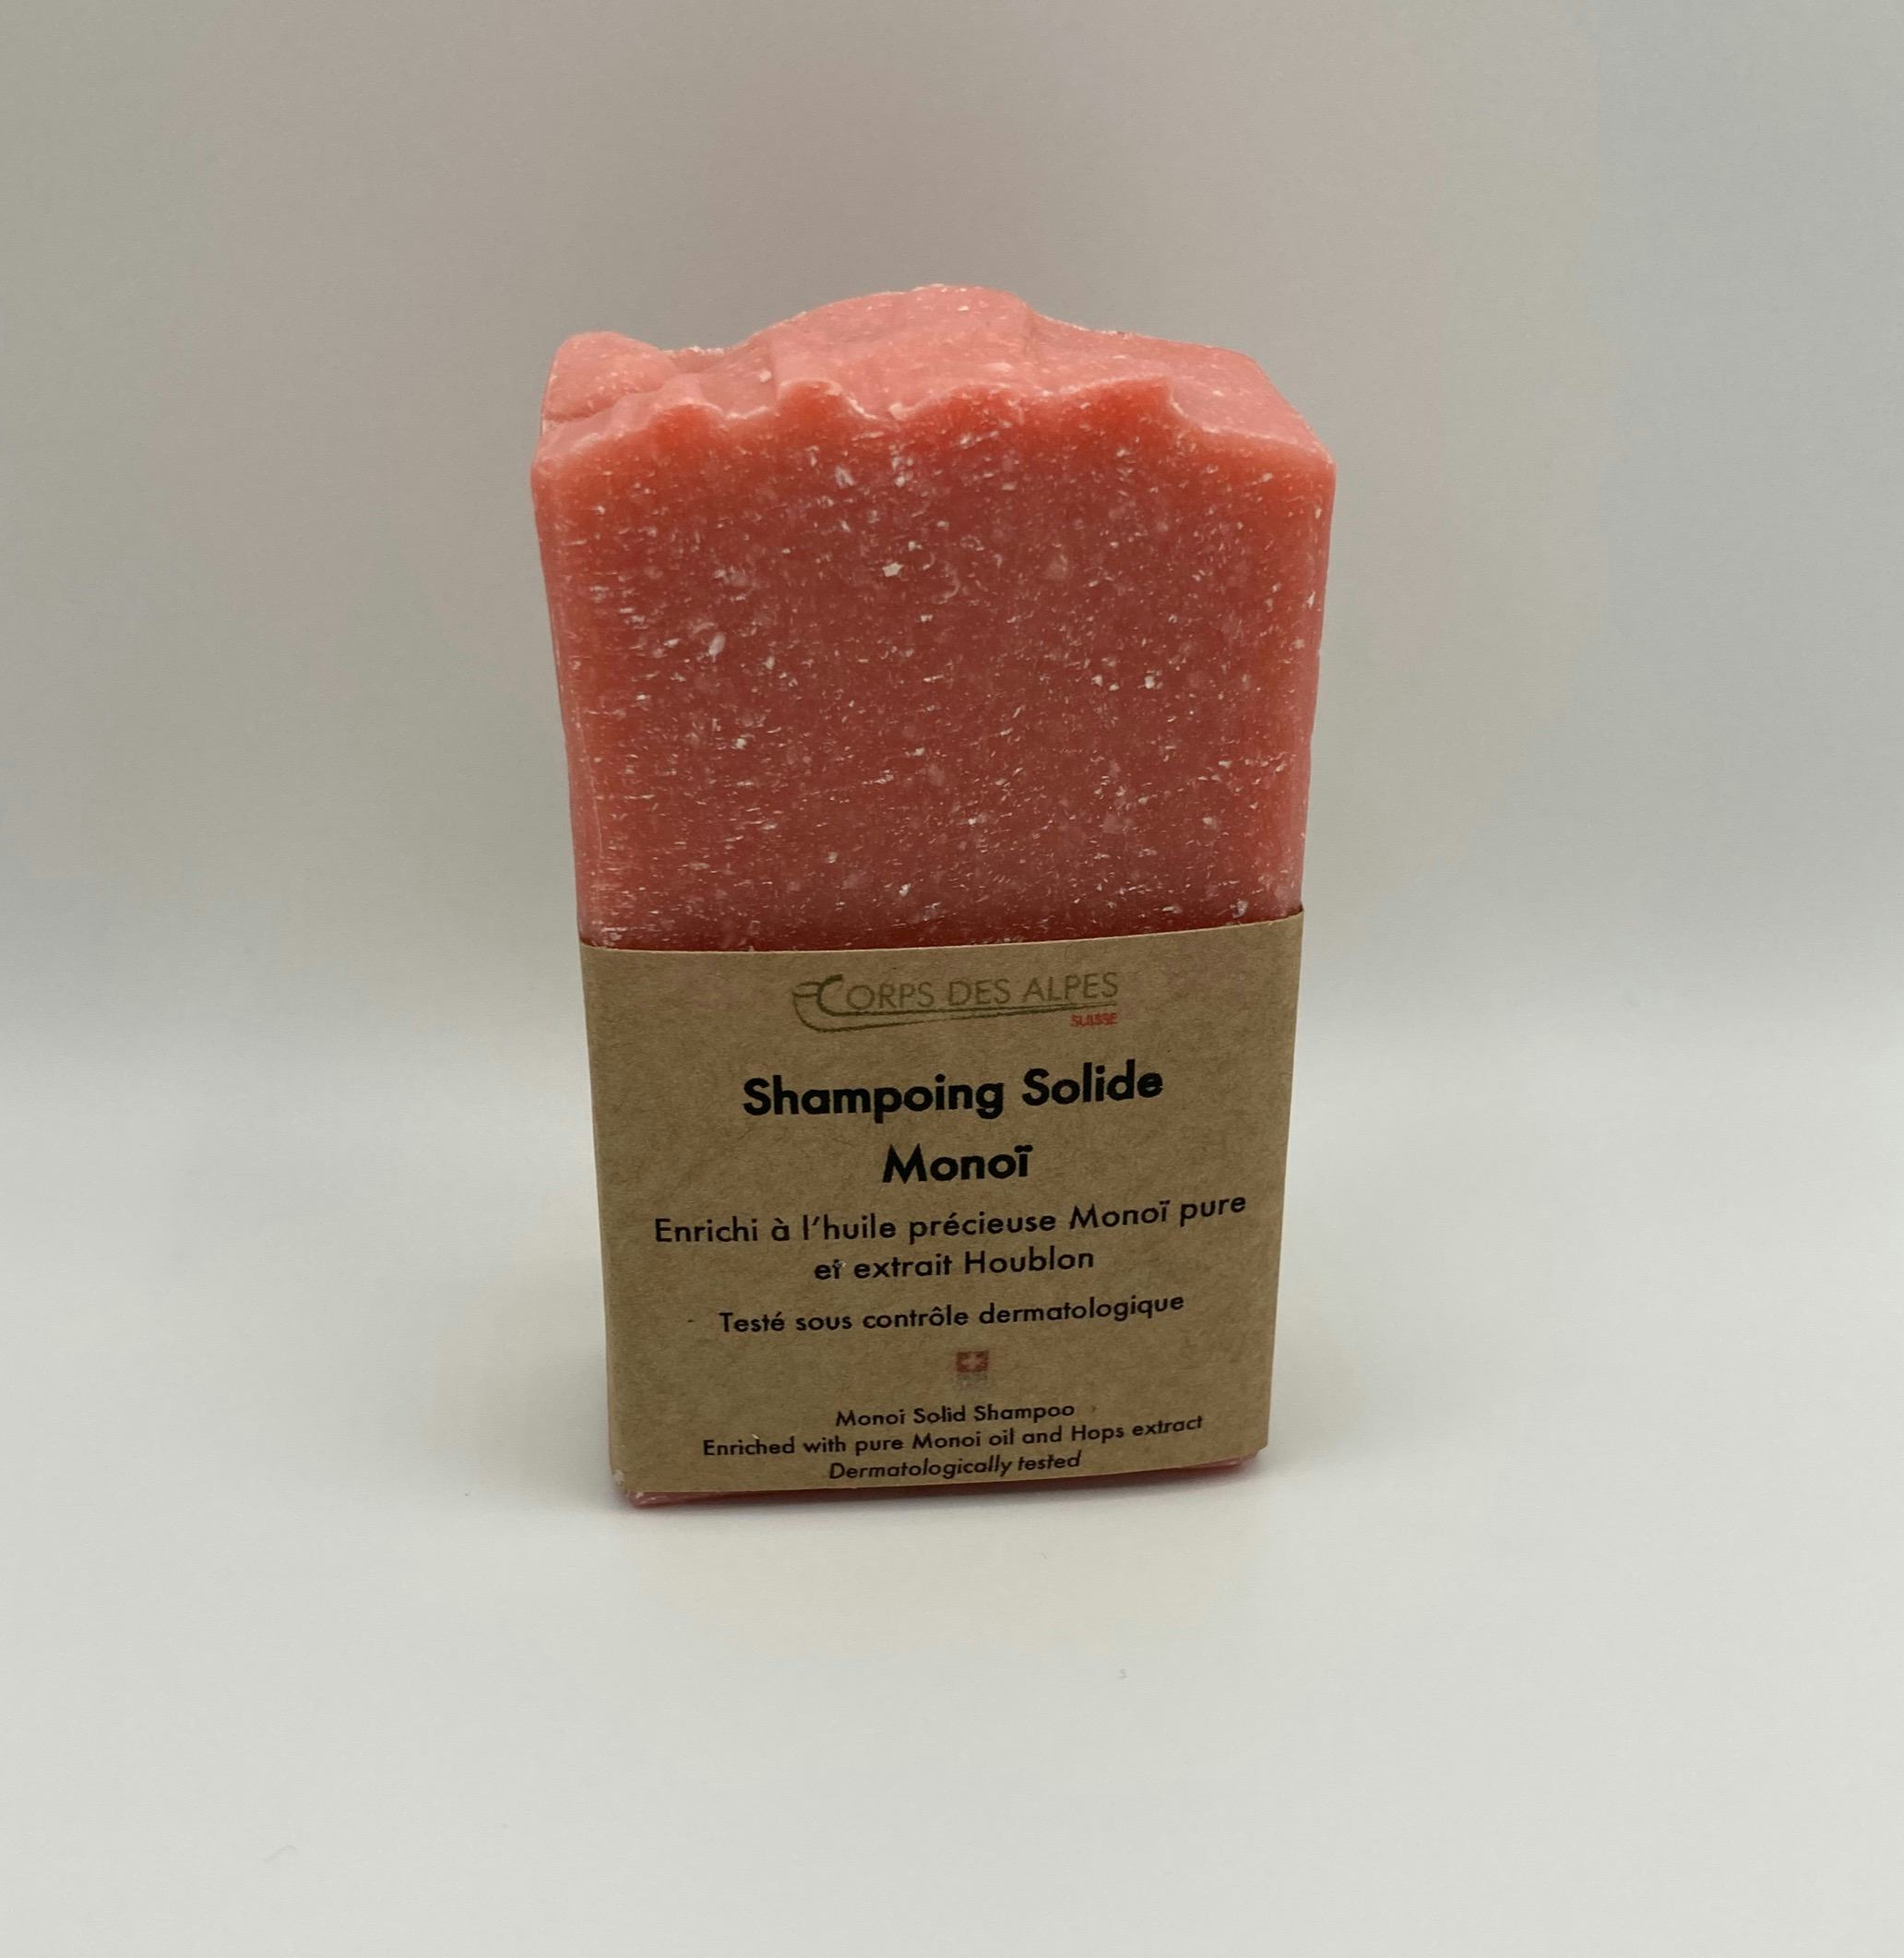 Monoï solid shampoo, artisanal product for direct sale in Switzerland